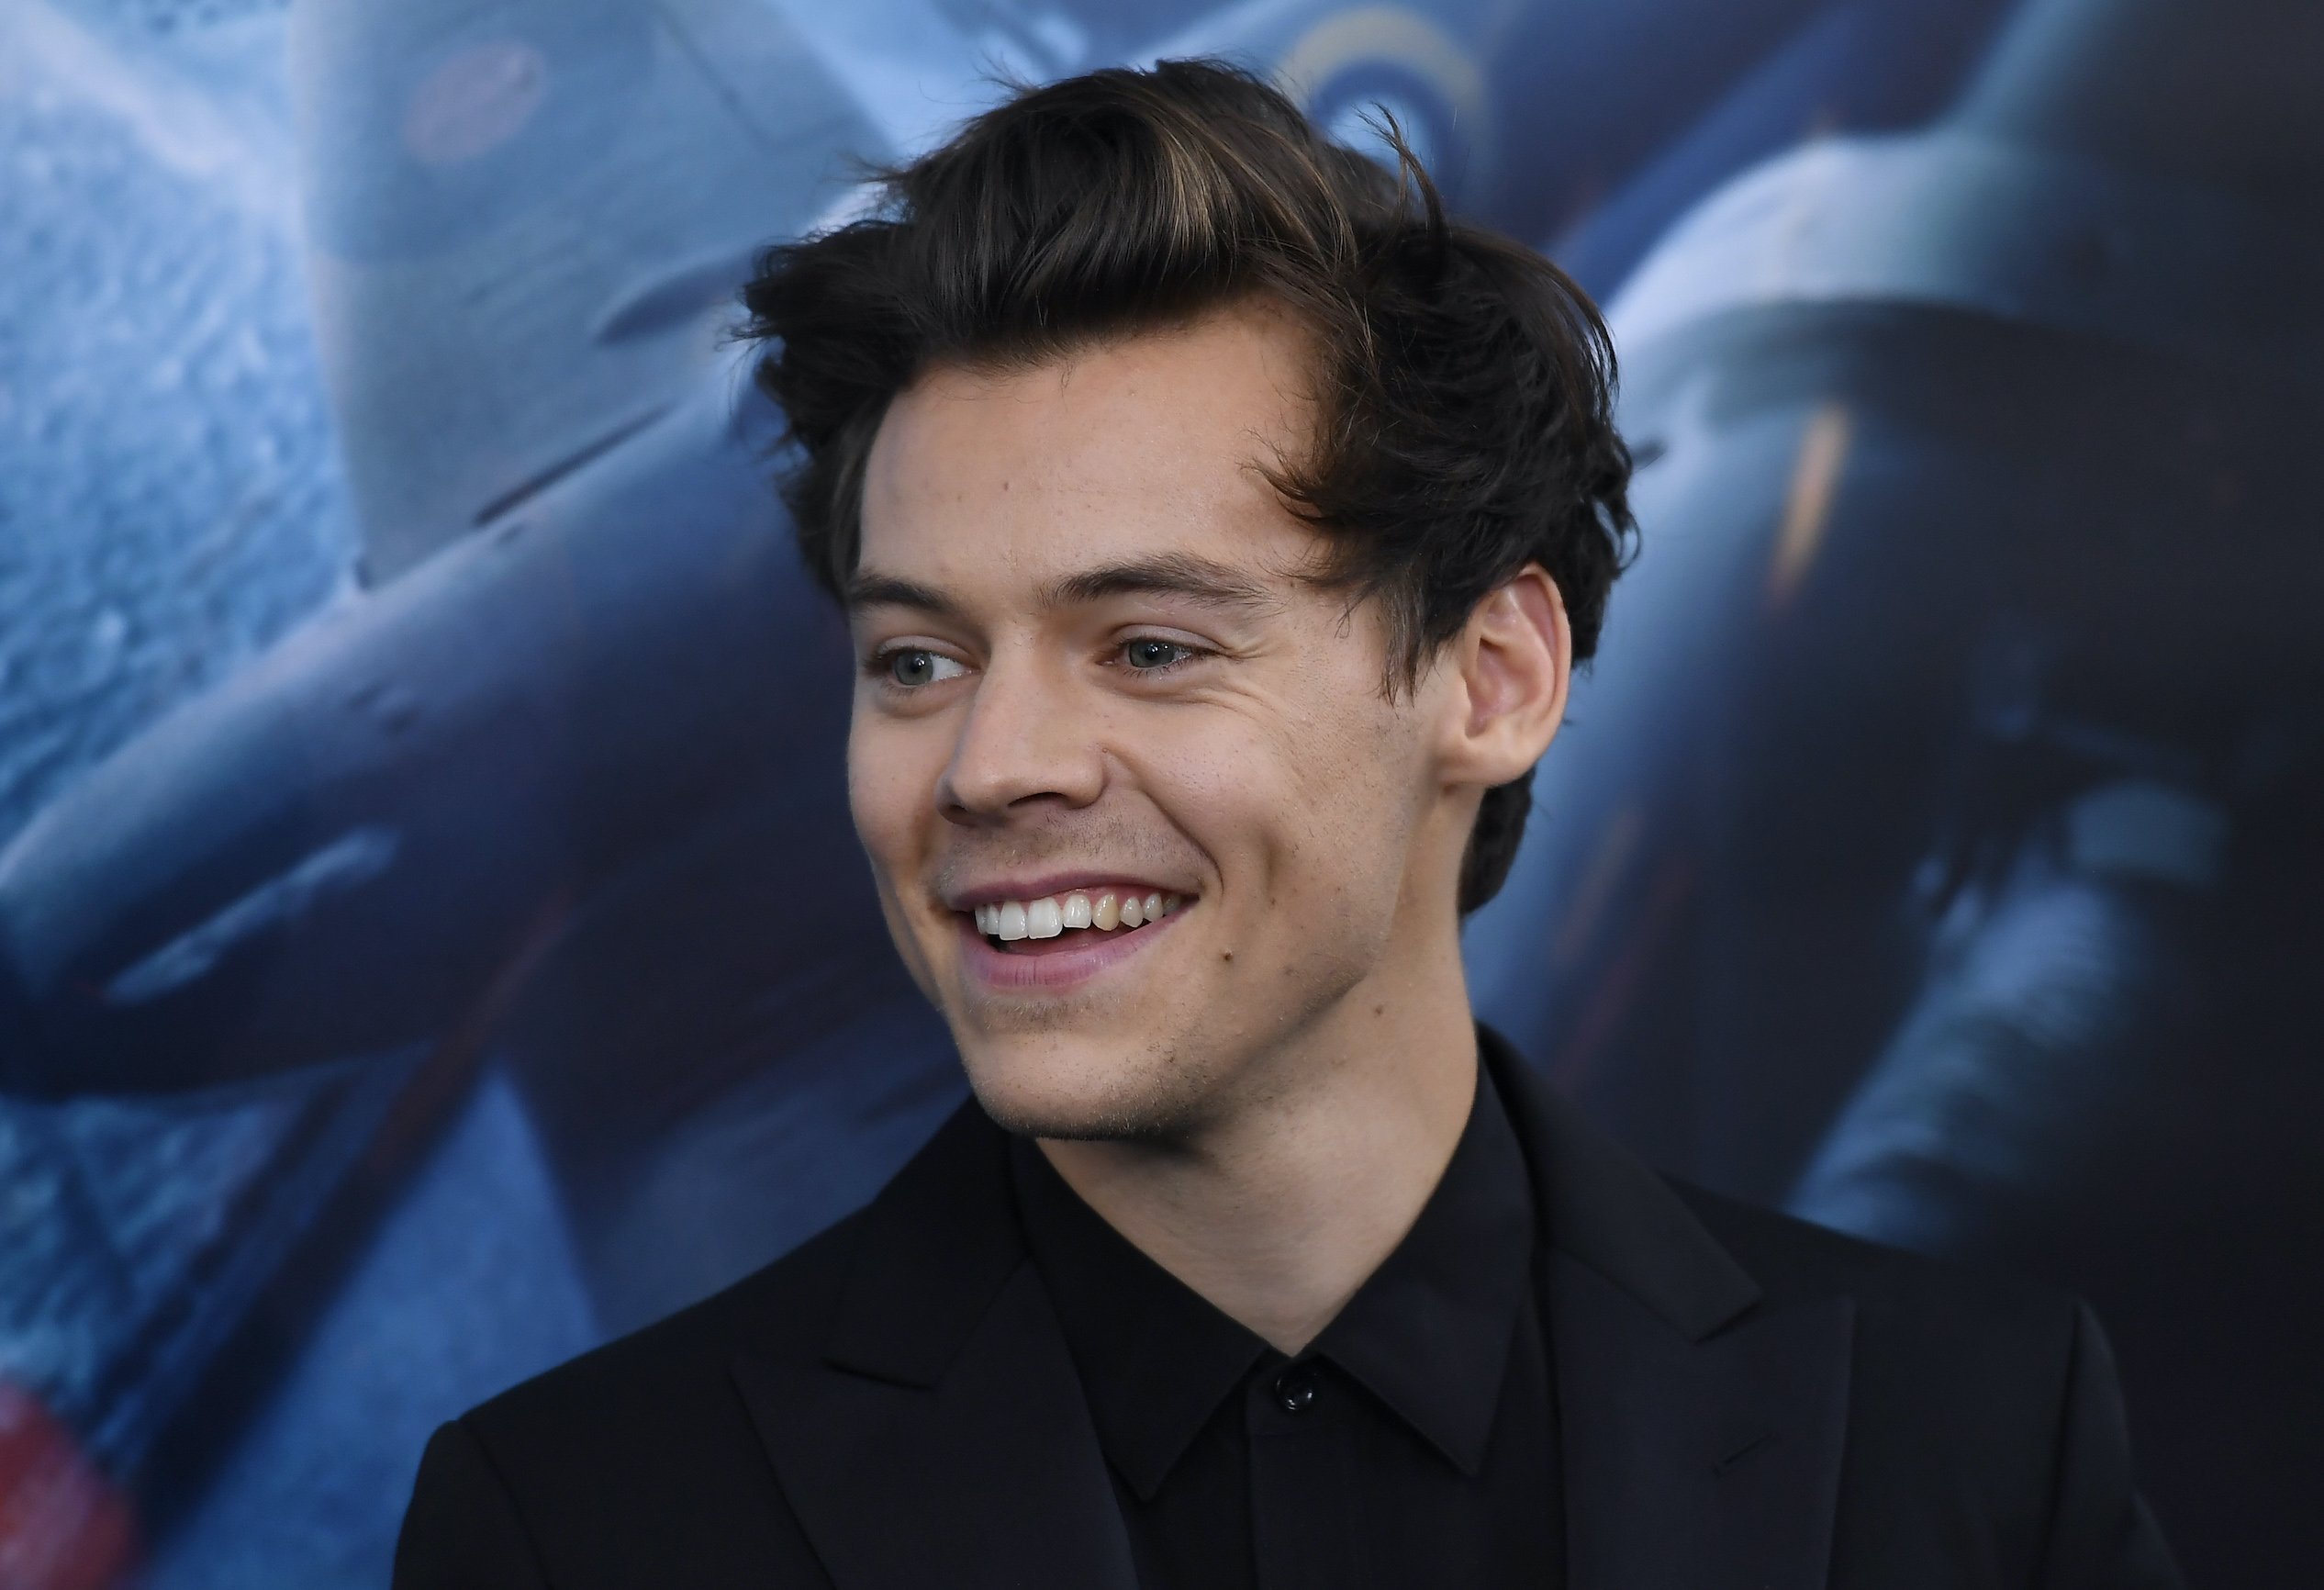 MTV VMA’s 2022: How Many Awards is Harry Styles Nominated For?